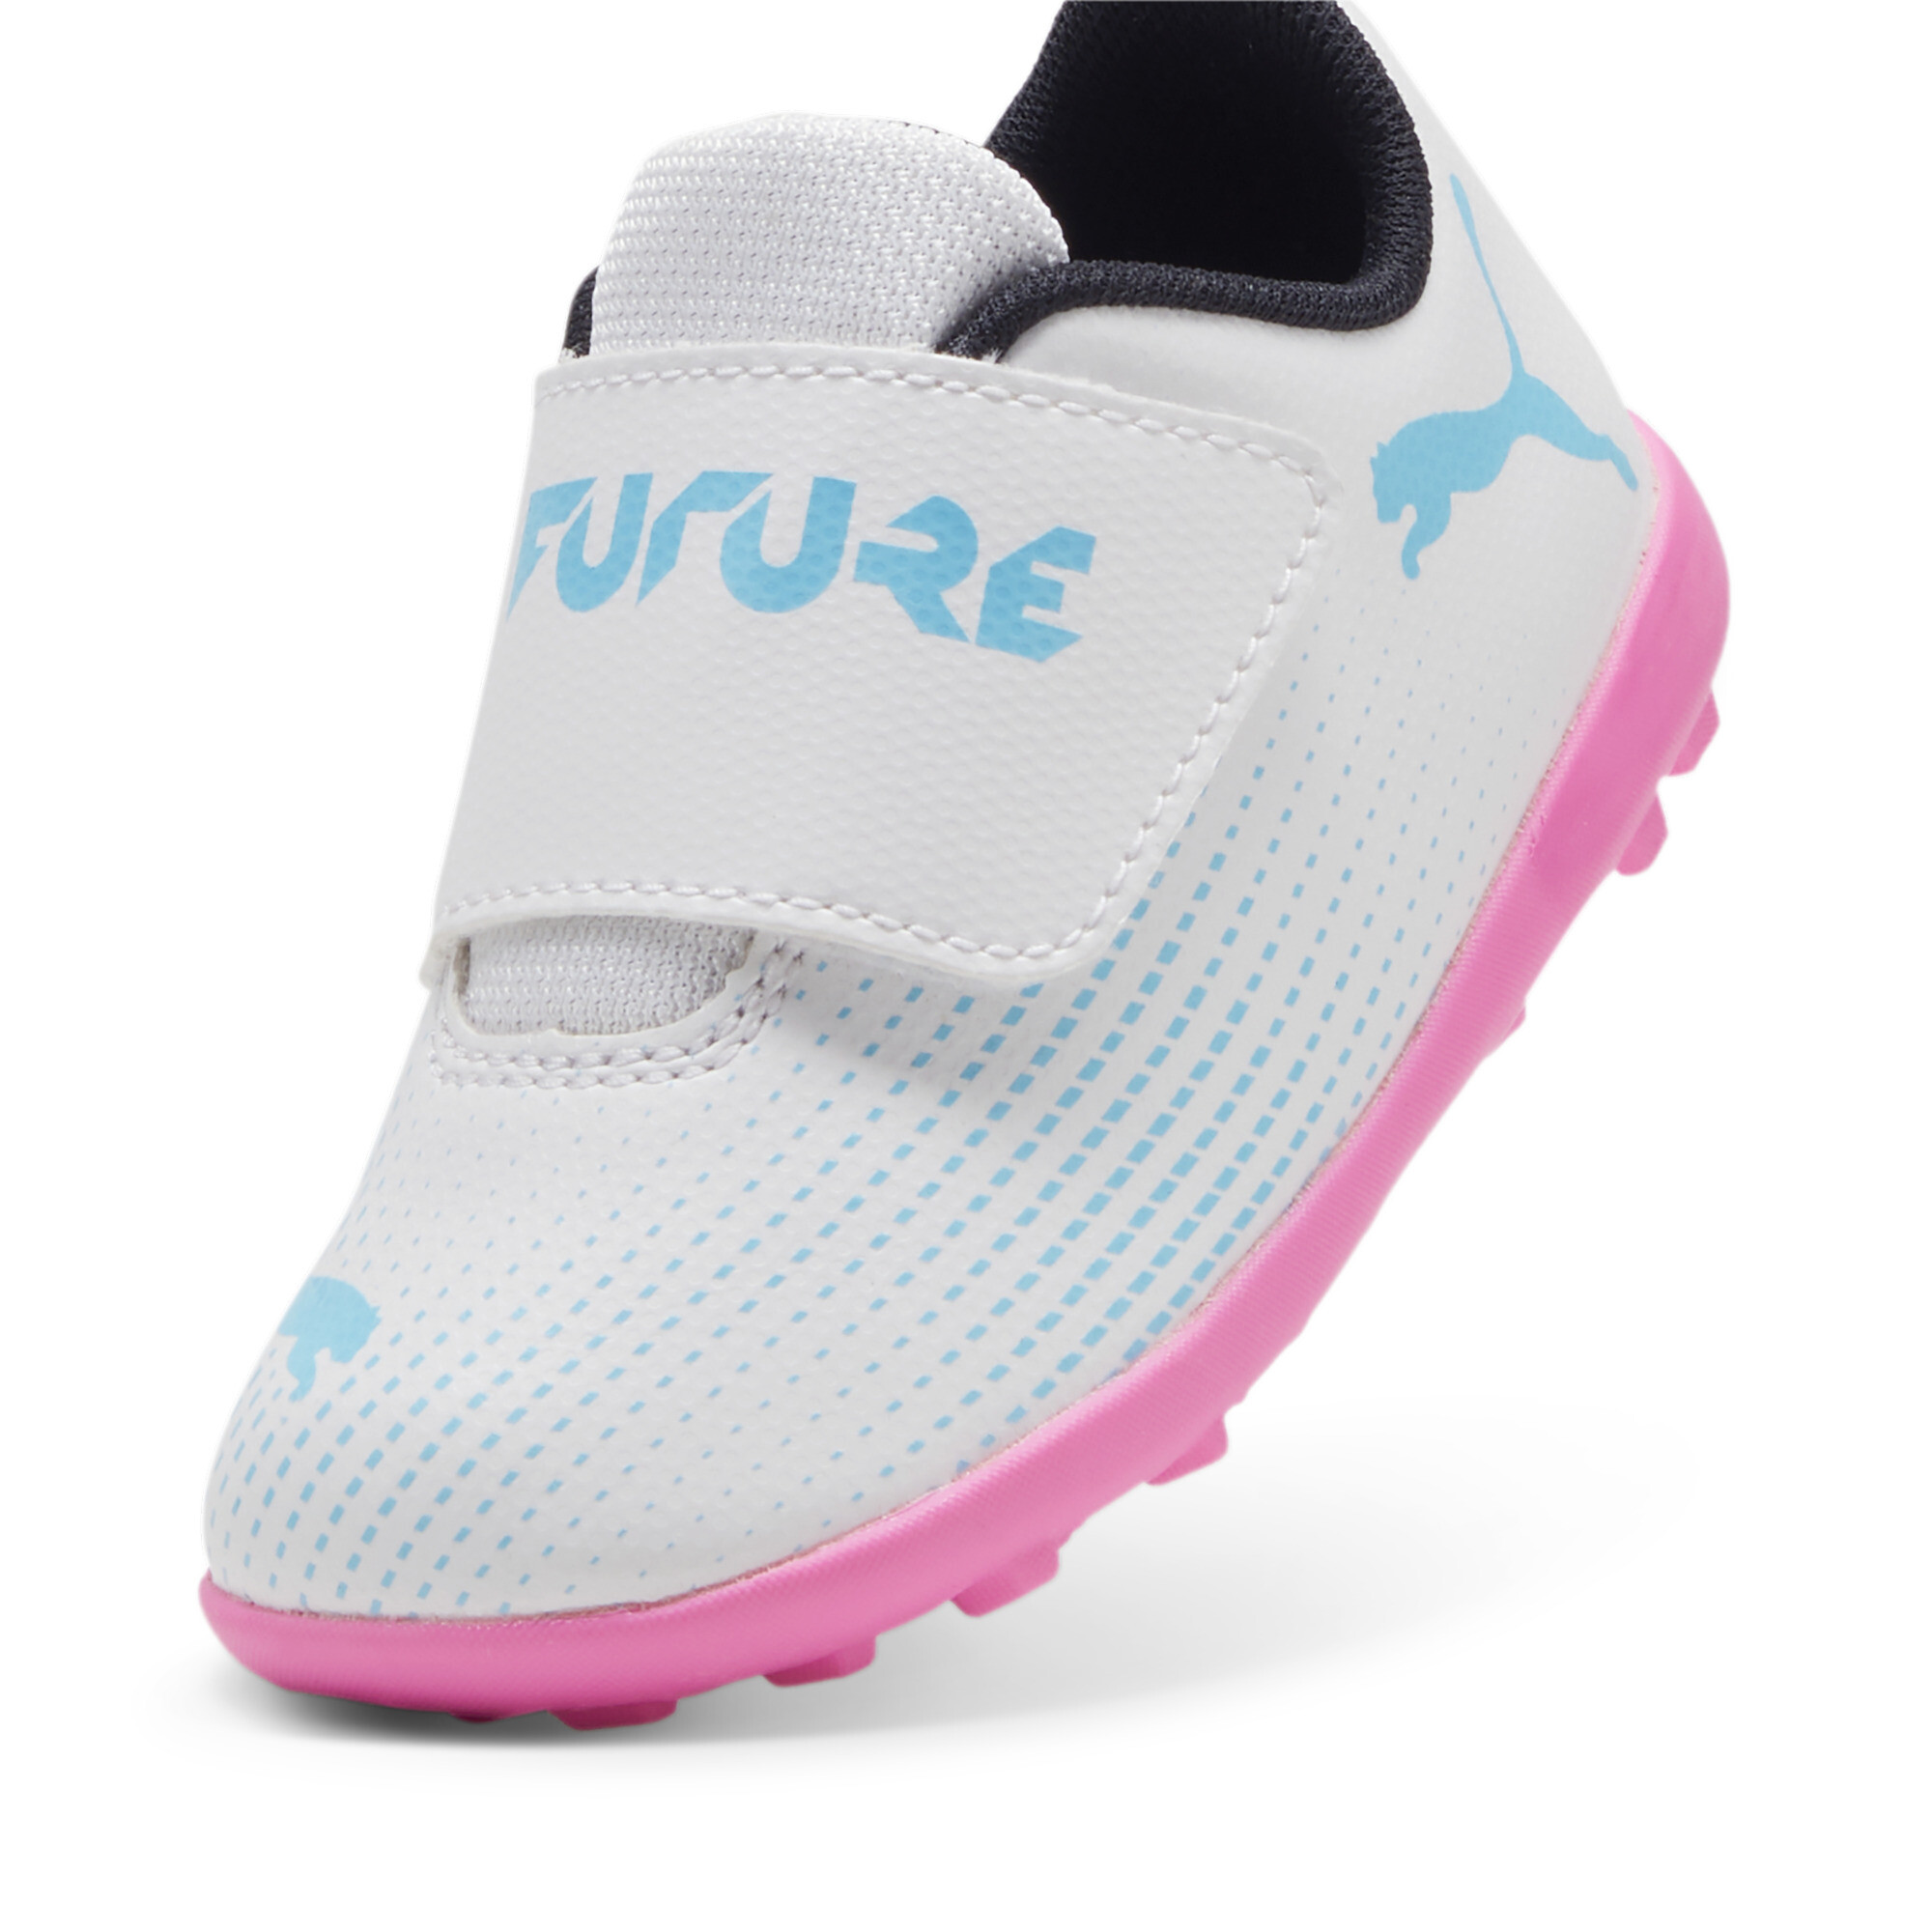 Kids' PUMA FUTURE 7 PLAY TT Toddlers' Football Boots In White/Pink, Size EU 27